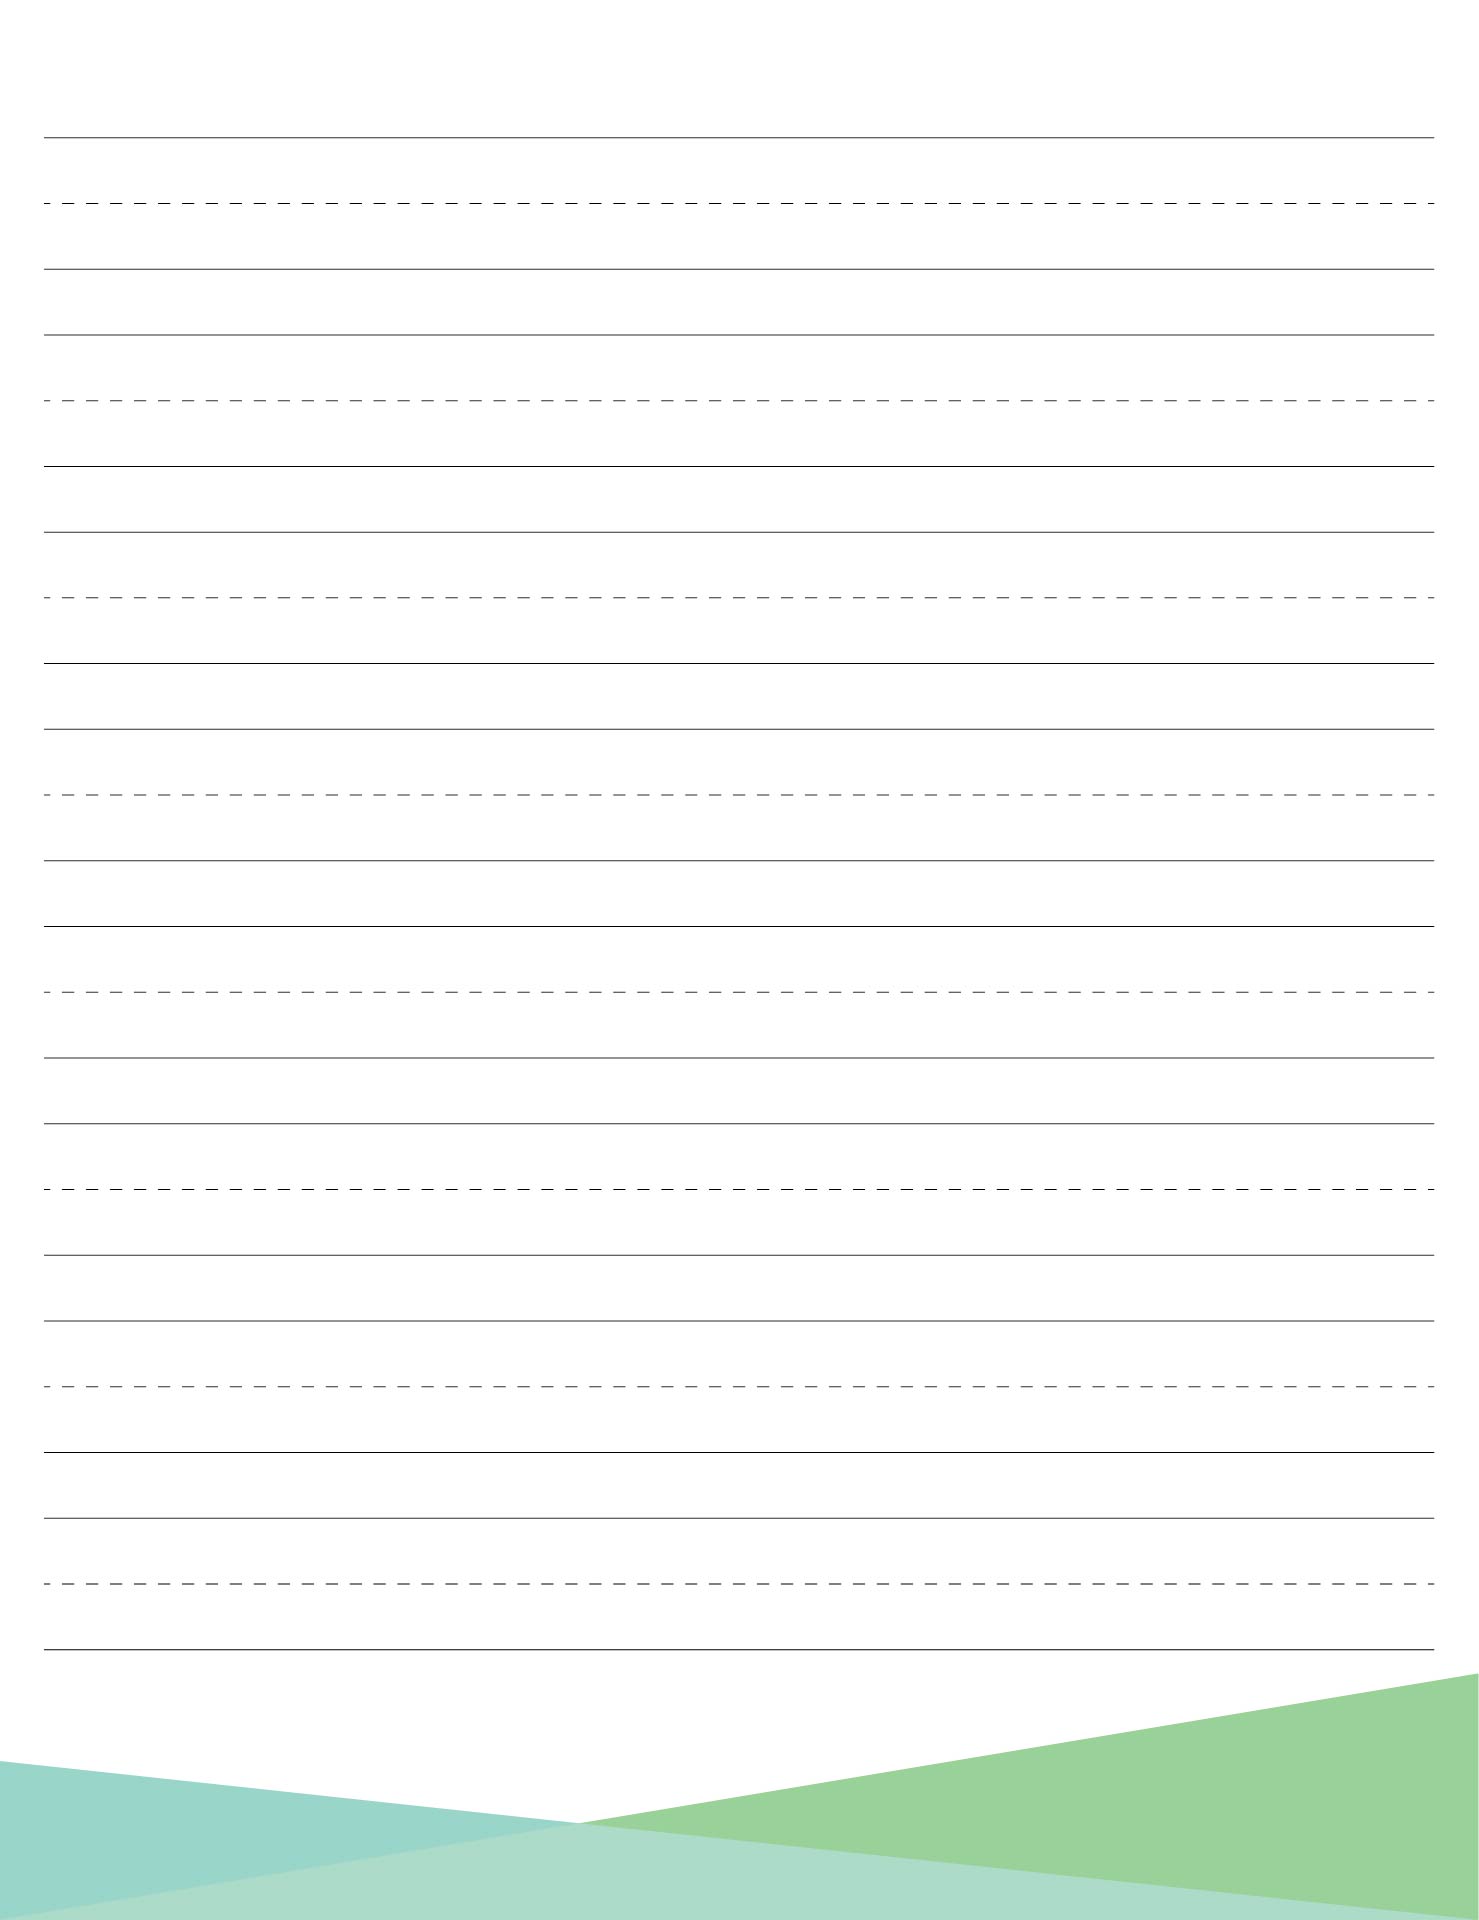 6-best-images-of-free-printable-kindergarten-paper-free-printable-lined-writing-paper